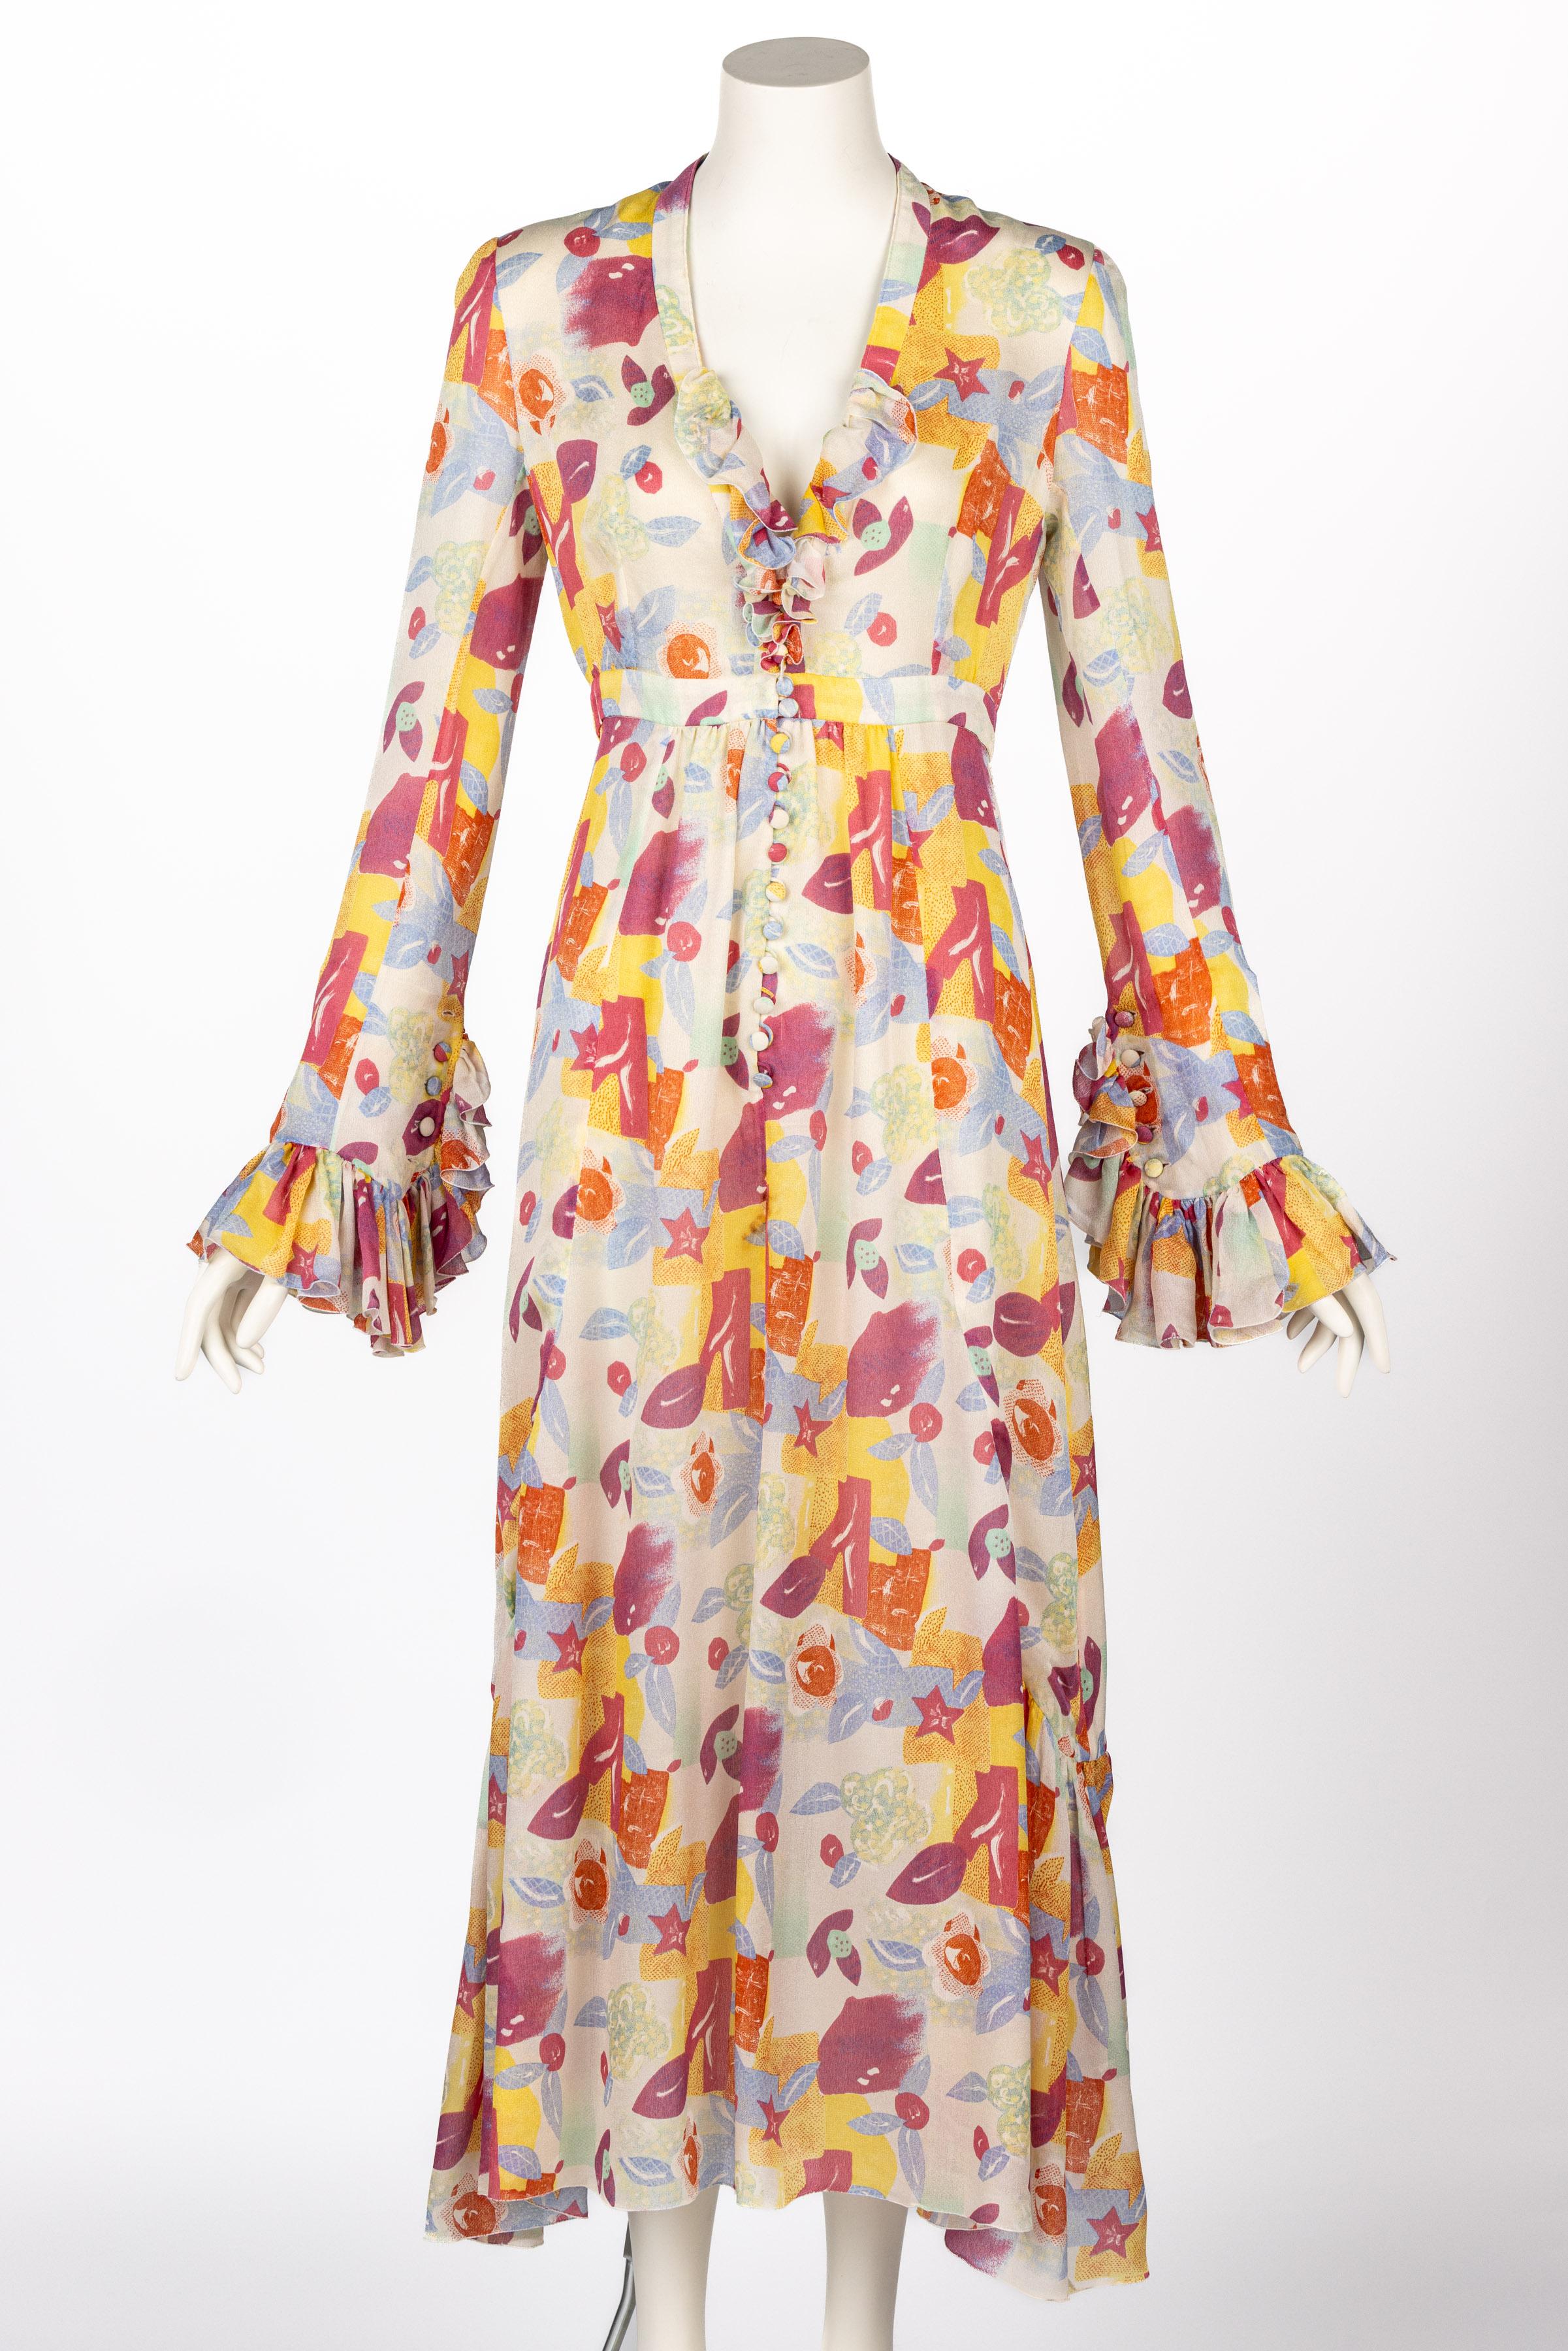 Chloe Karl Lagerfeld Floral Printed Silk Dress S/S 1993 Vogue Documented In Good Condition For Sale In Boca Raton, FL